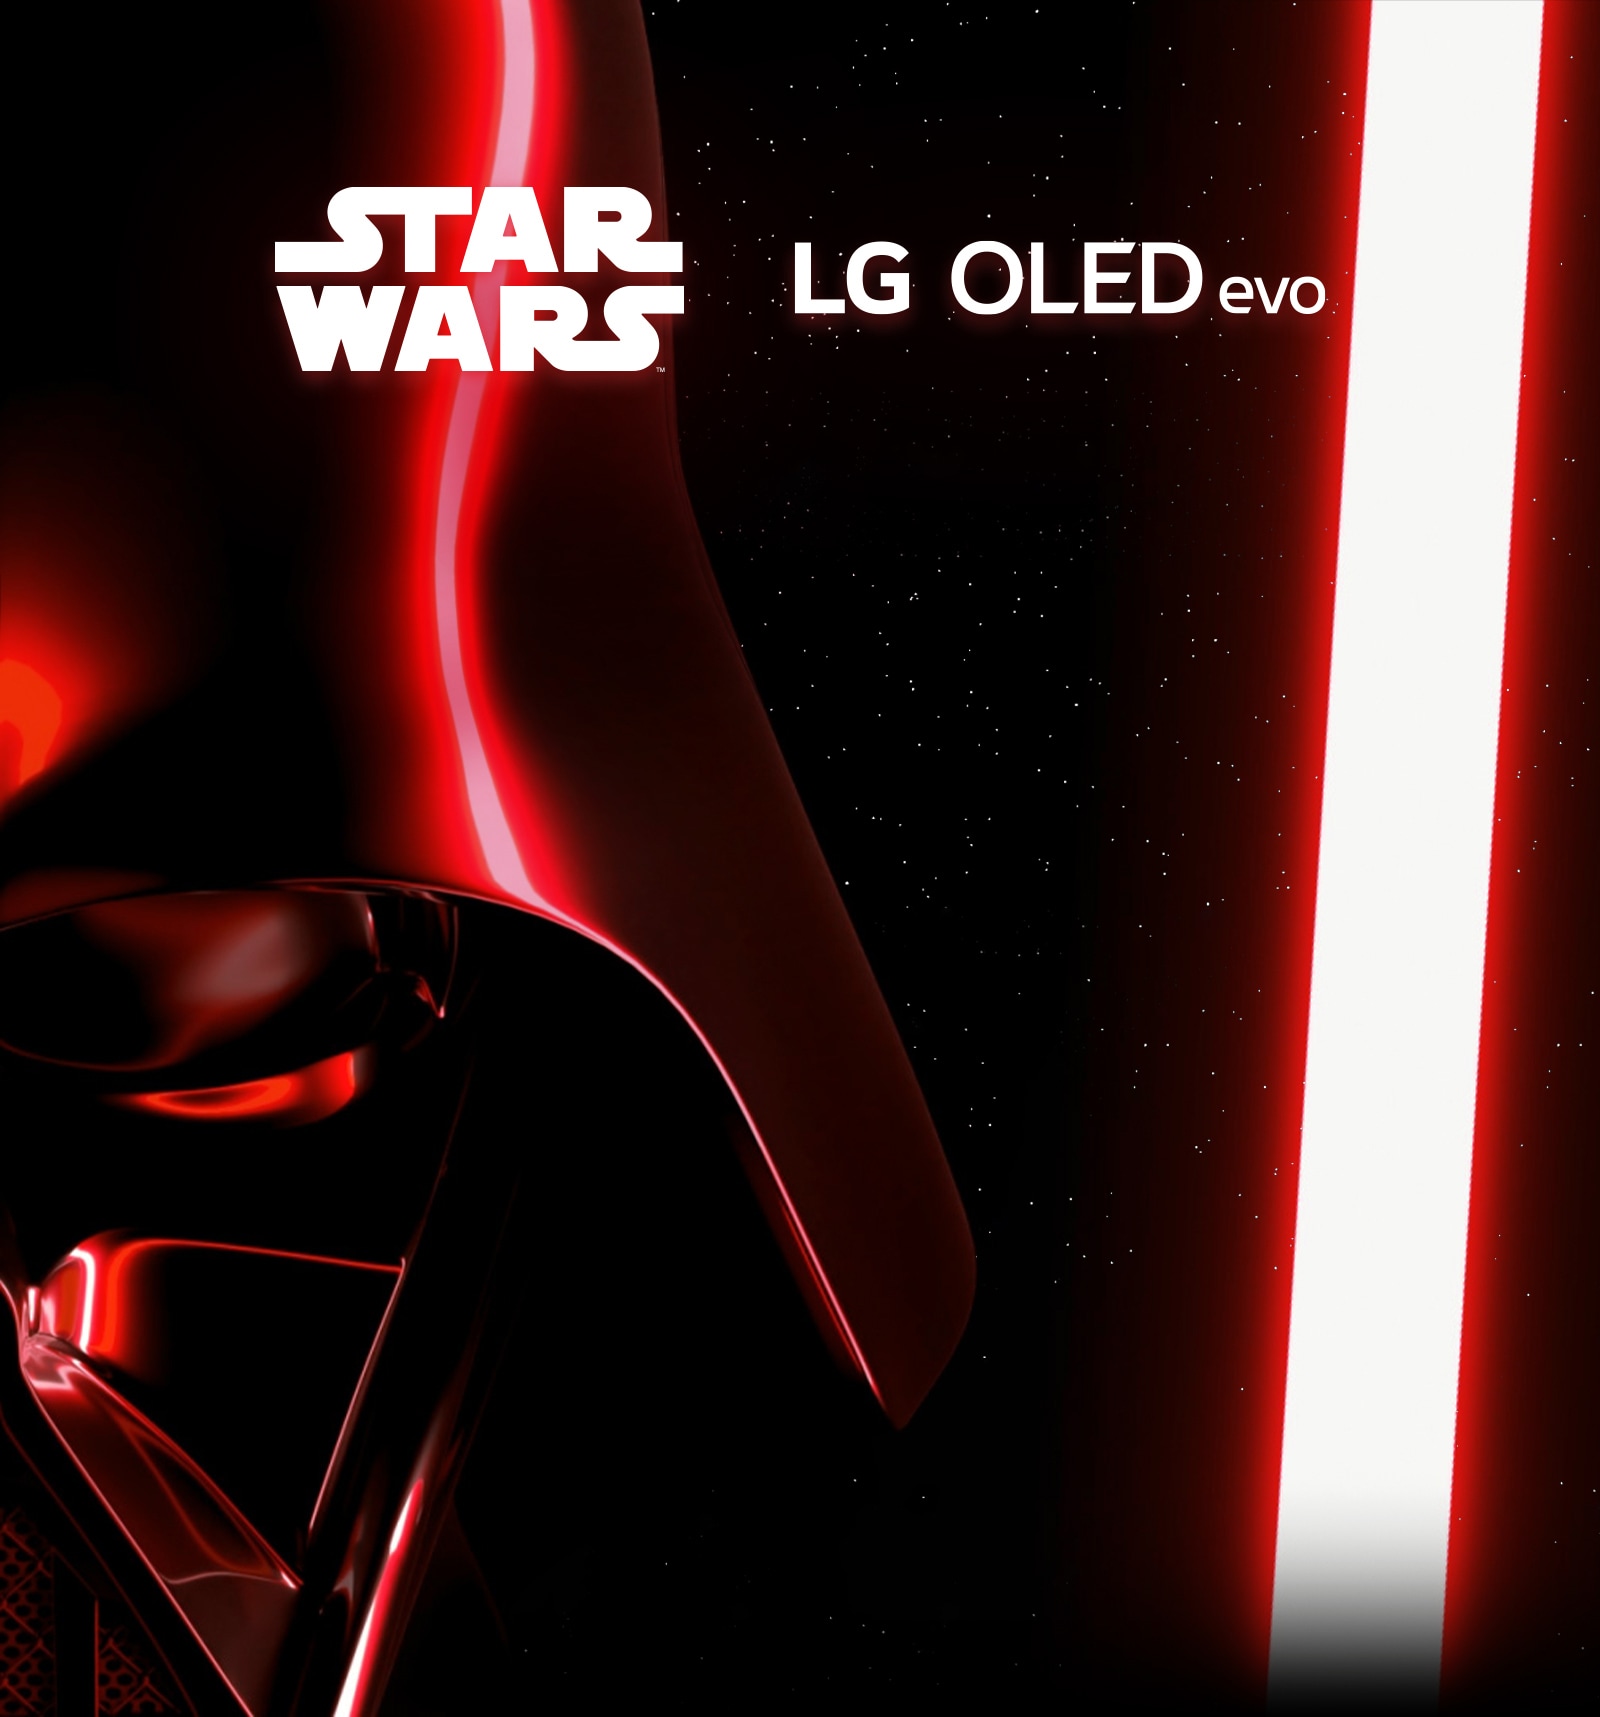 Meet the Star Wars™ Special Edition LG OLED1